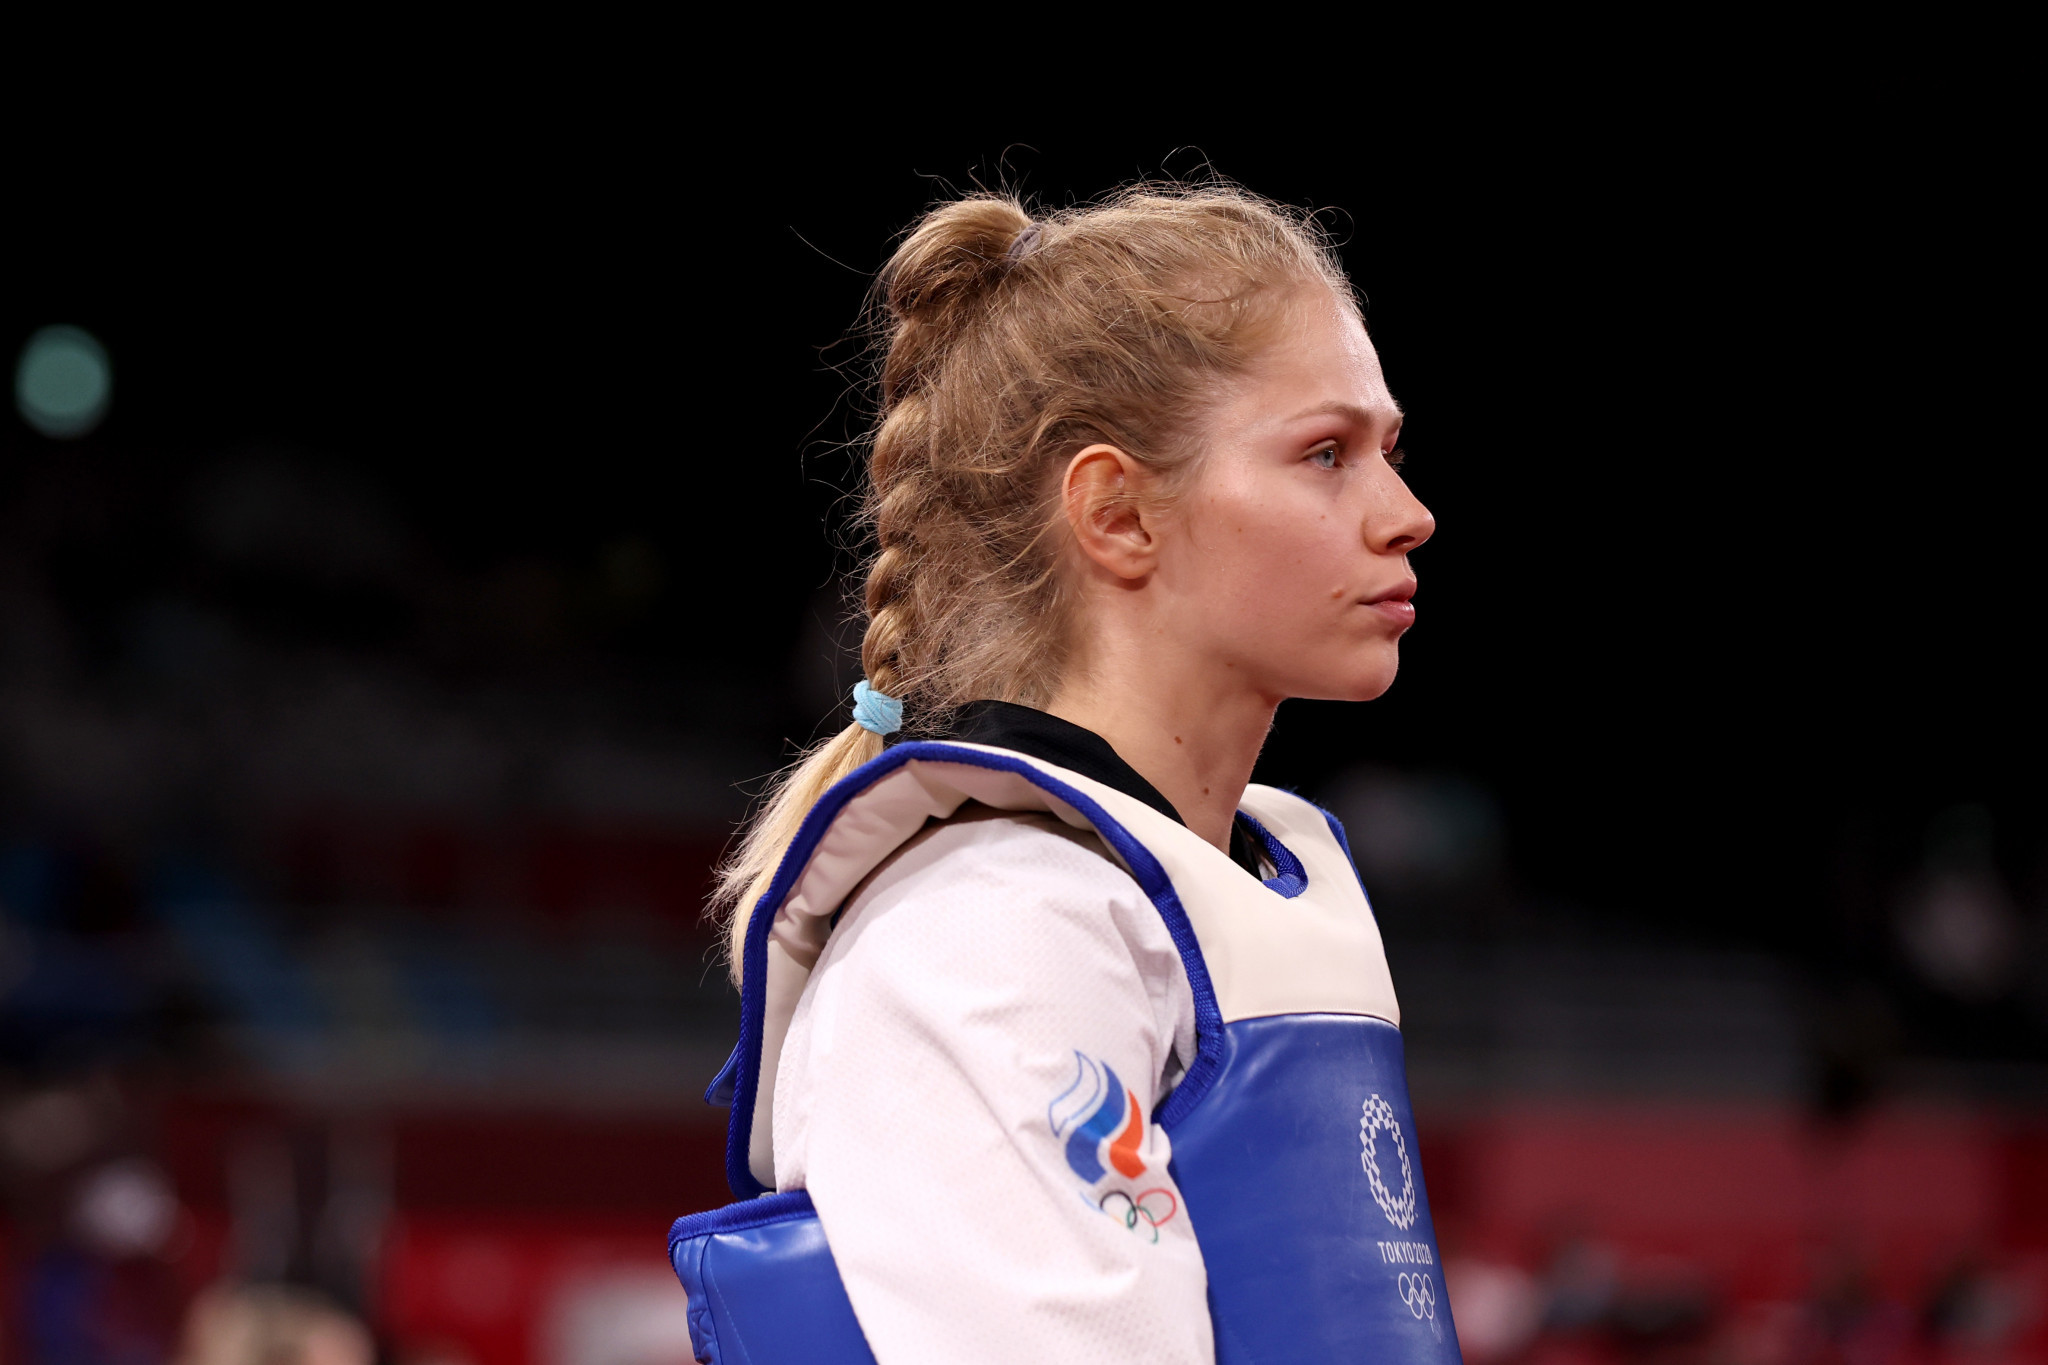 Exclusive: World Taekwondo investigates claim Russians competed after liking pro-war posts